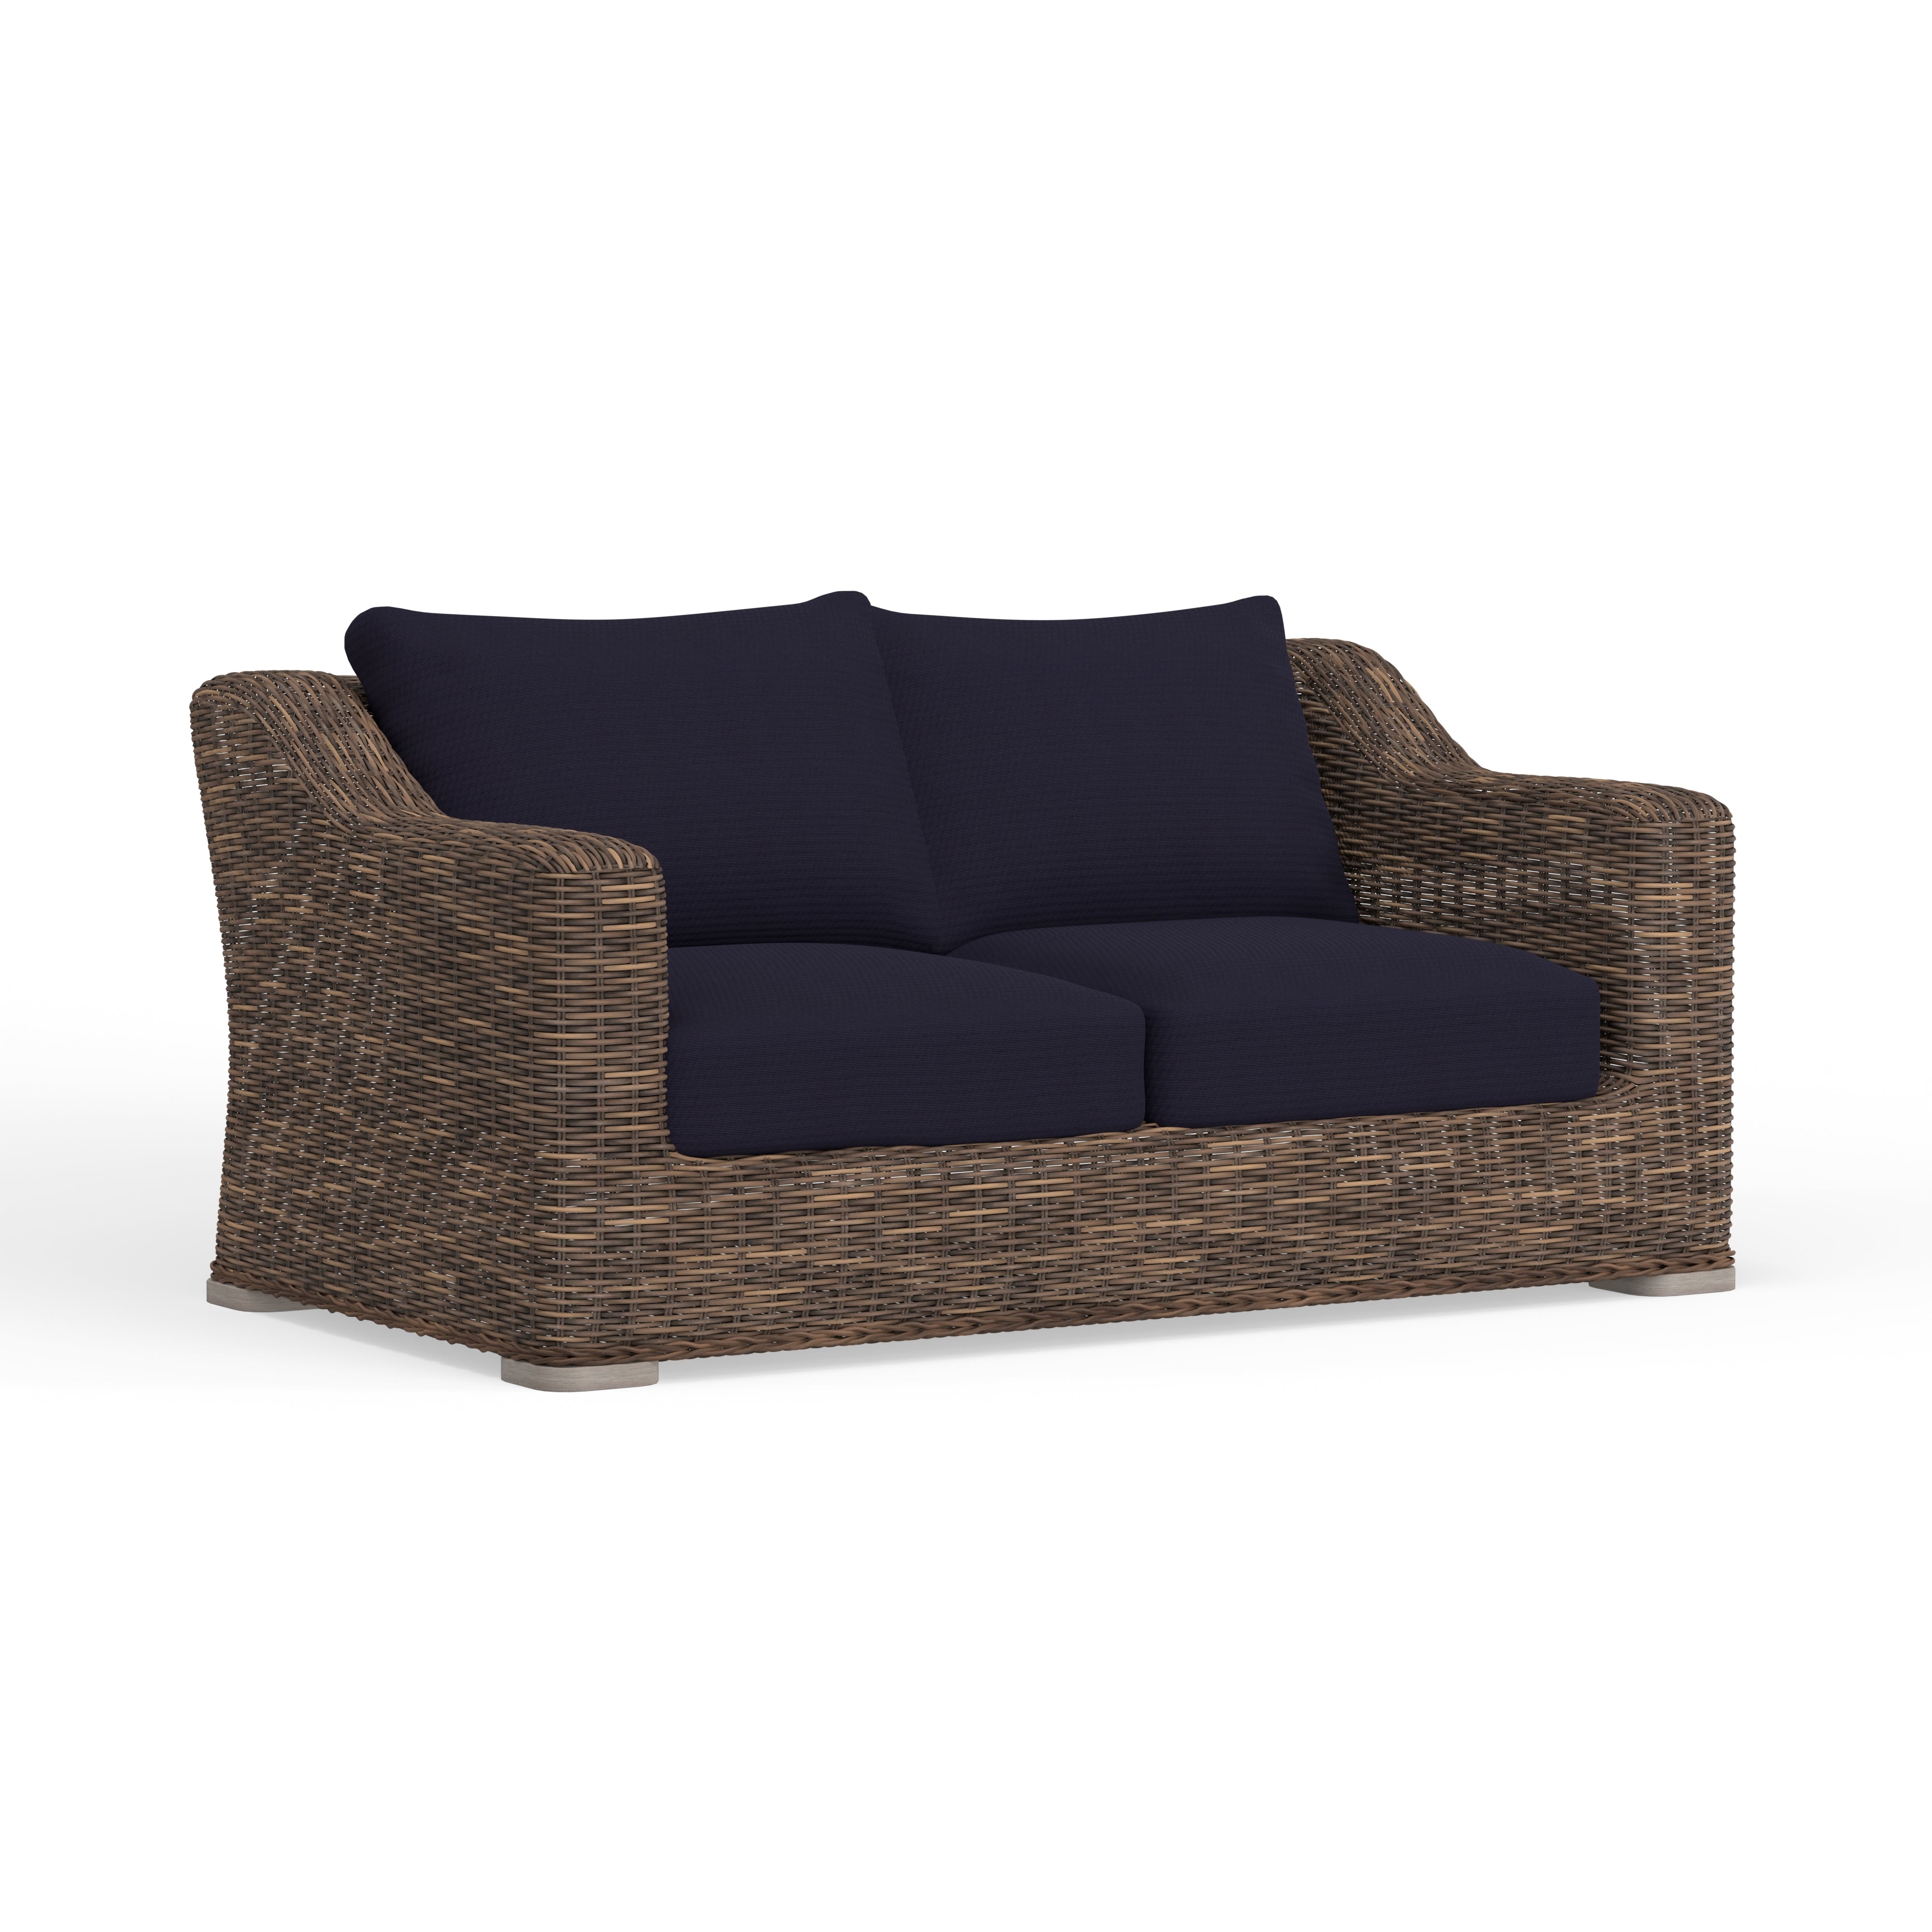 Sunbrella Cushions On The Best Looking Outdoor Wicker Seating Set